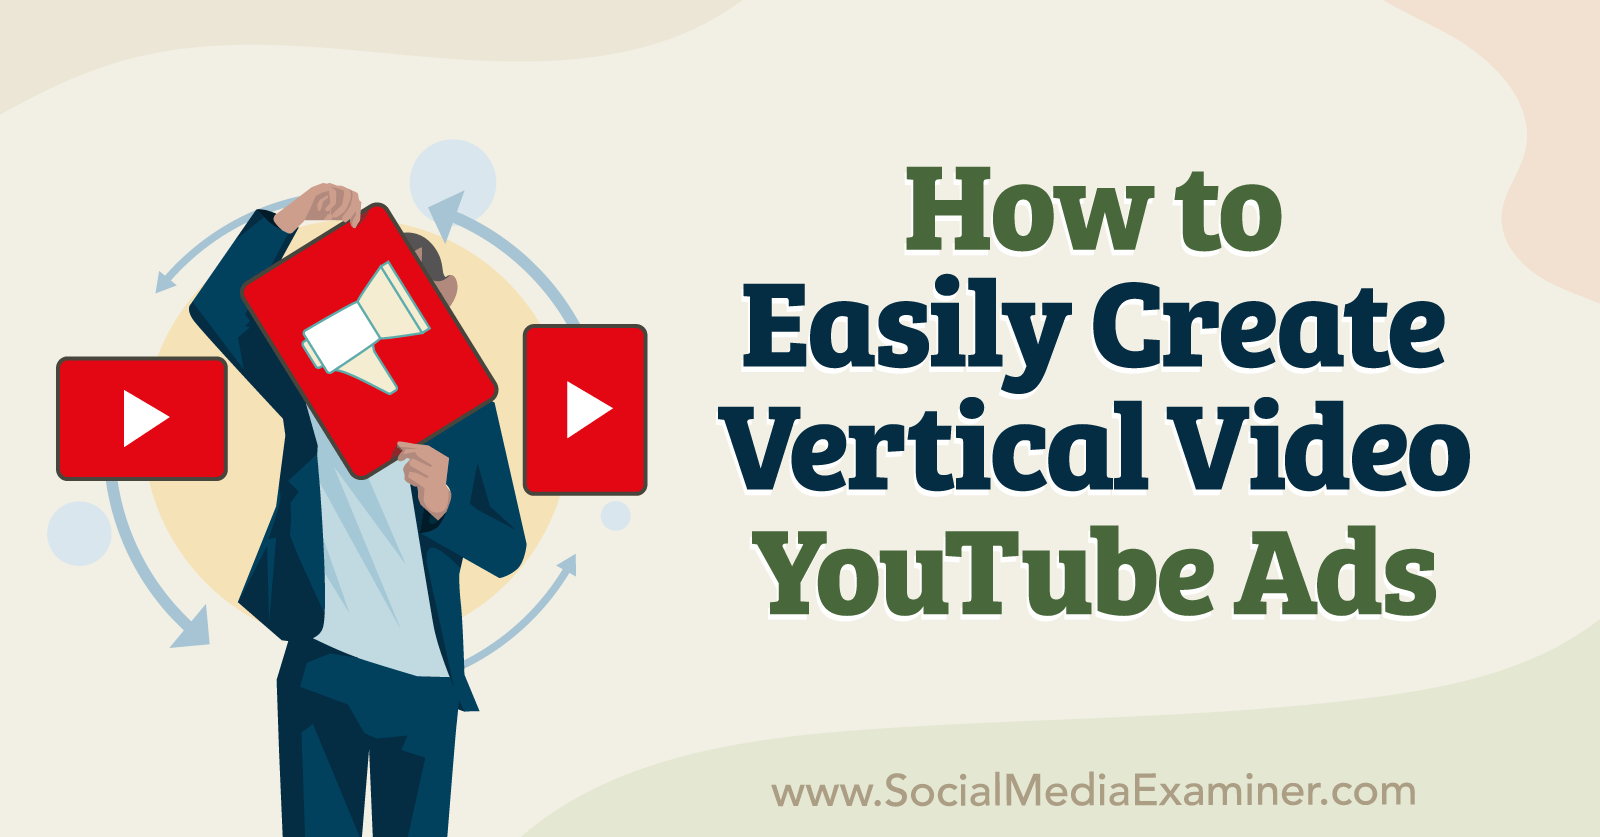 How to Easily Create Vertical Video YouTube Ads-Social Media Examiner